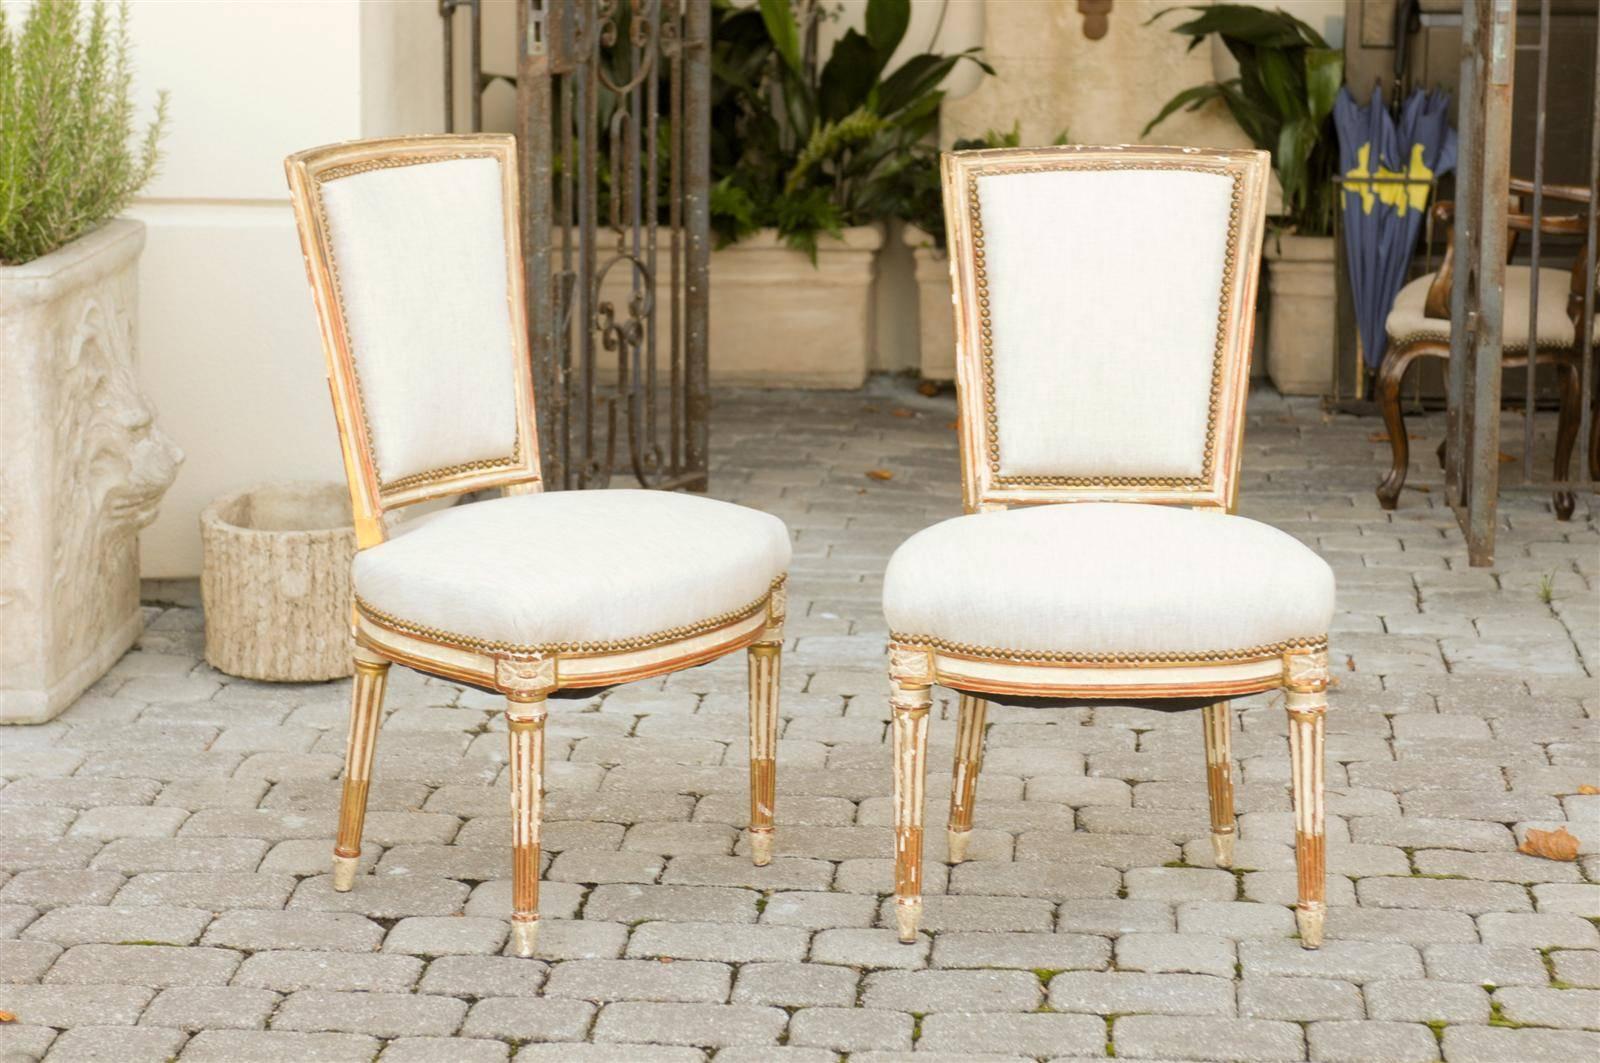 This exquisite pair of French Louis XVI style painted side chairs features slightly slanted upholstered backs over muslin upholstered seats with nailhead trim. The carved rosettes on the knees are rounded to follow the line of the tapered legs